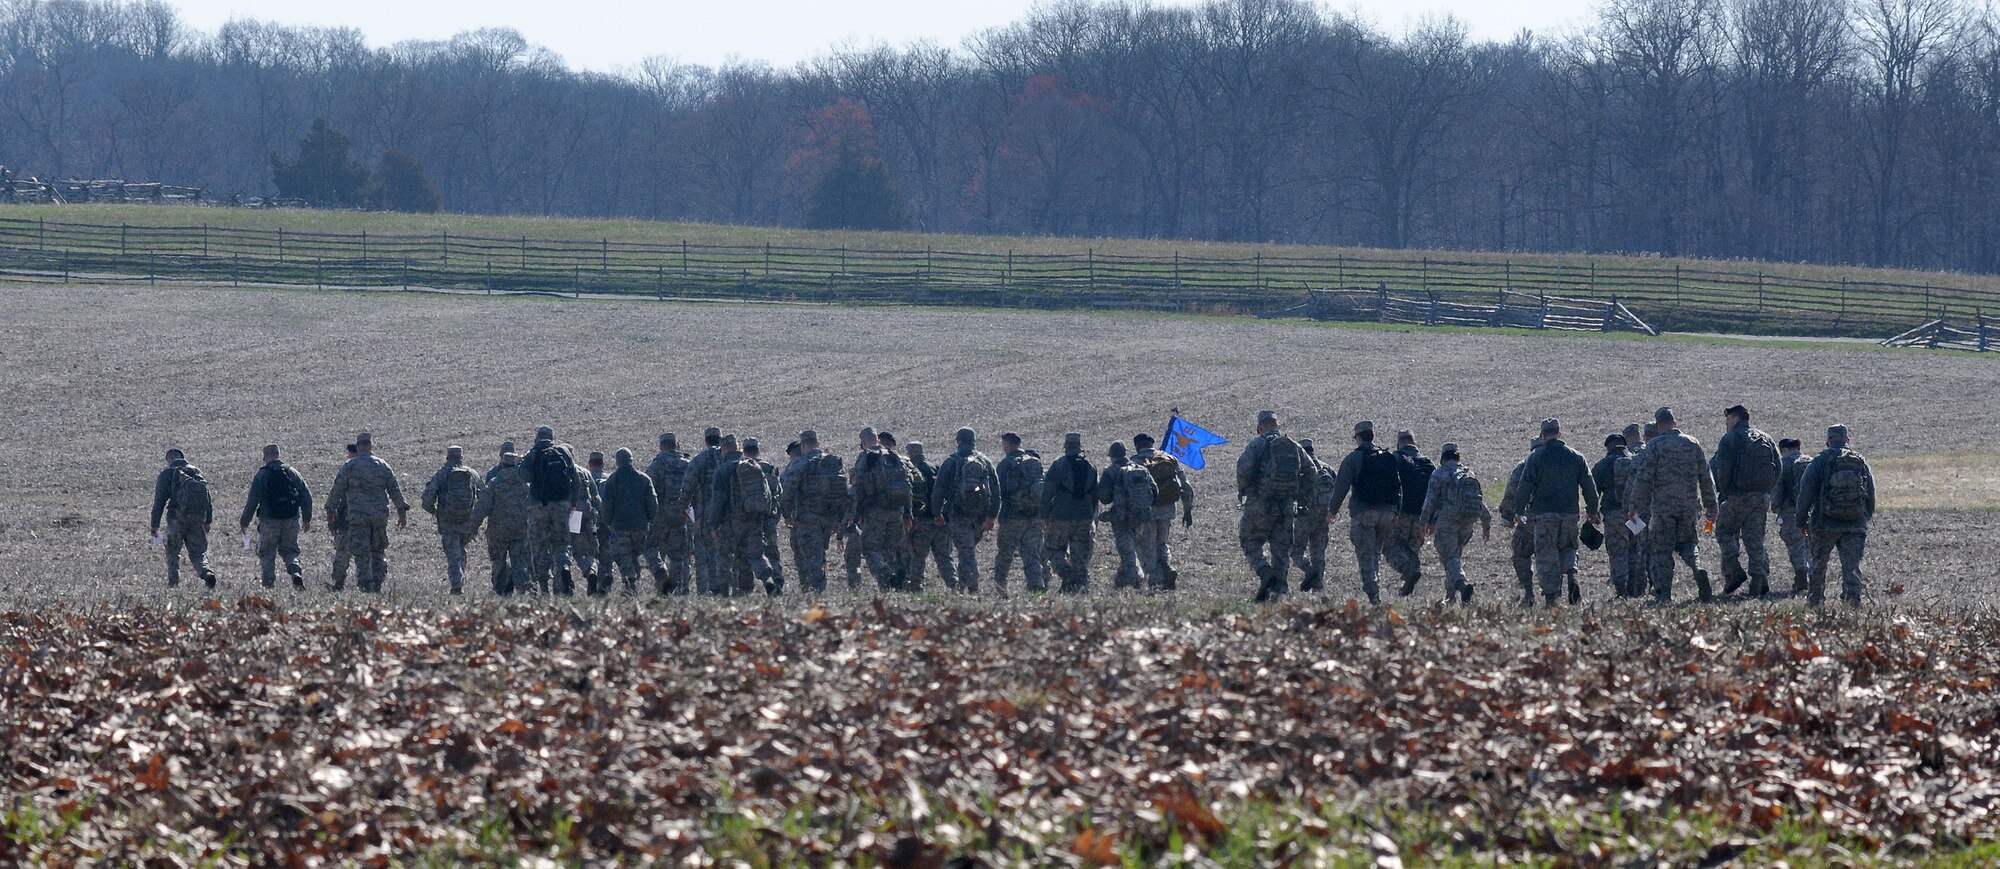 Members of the 111th Security Forces Squadron, Horsham Air Guard Station, Pennsylvania,  begin a ruck march April 11, 2015 at Gettysburg National Military Park. Nearly 60 Guardsmen from the 111th Attack Wing’s security forces squadron participated in a four-day team building and skills training event, April 9 – 12, 2015, at the state’s joint-force training center at Fort Indiantown Gap and at Gettysburg National Military Park. (U.S. Air National Guard photo by Tech. Sgt. Andria Allmond/Released)